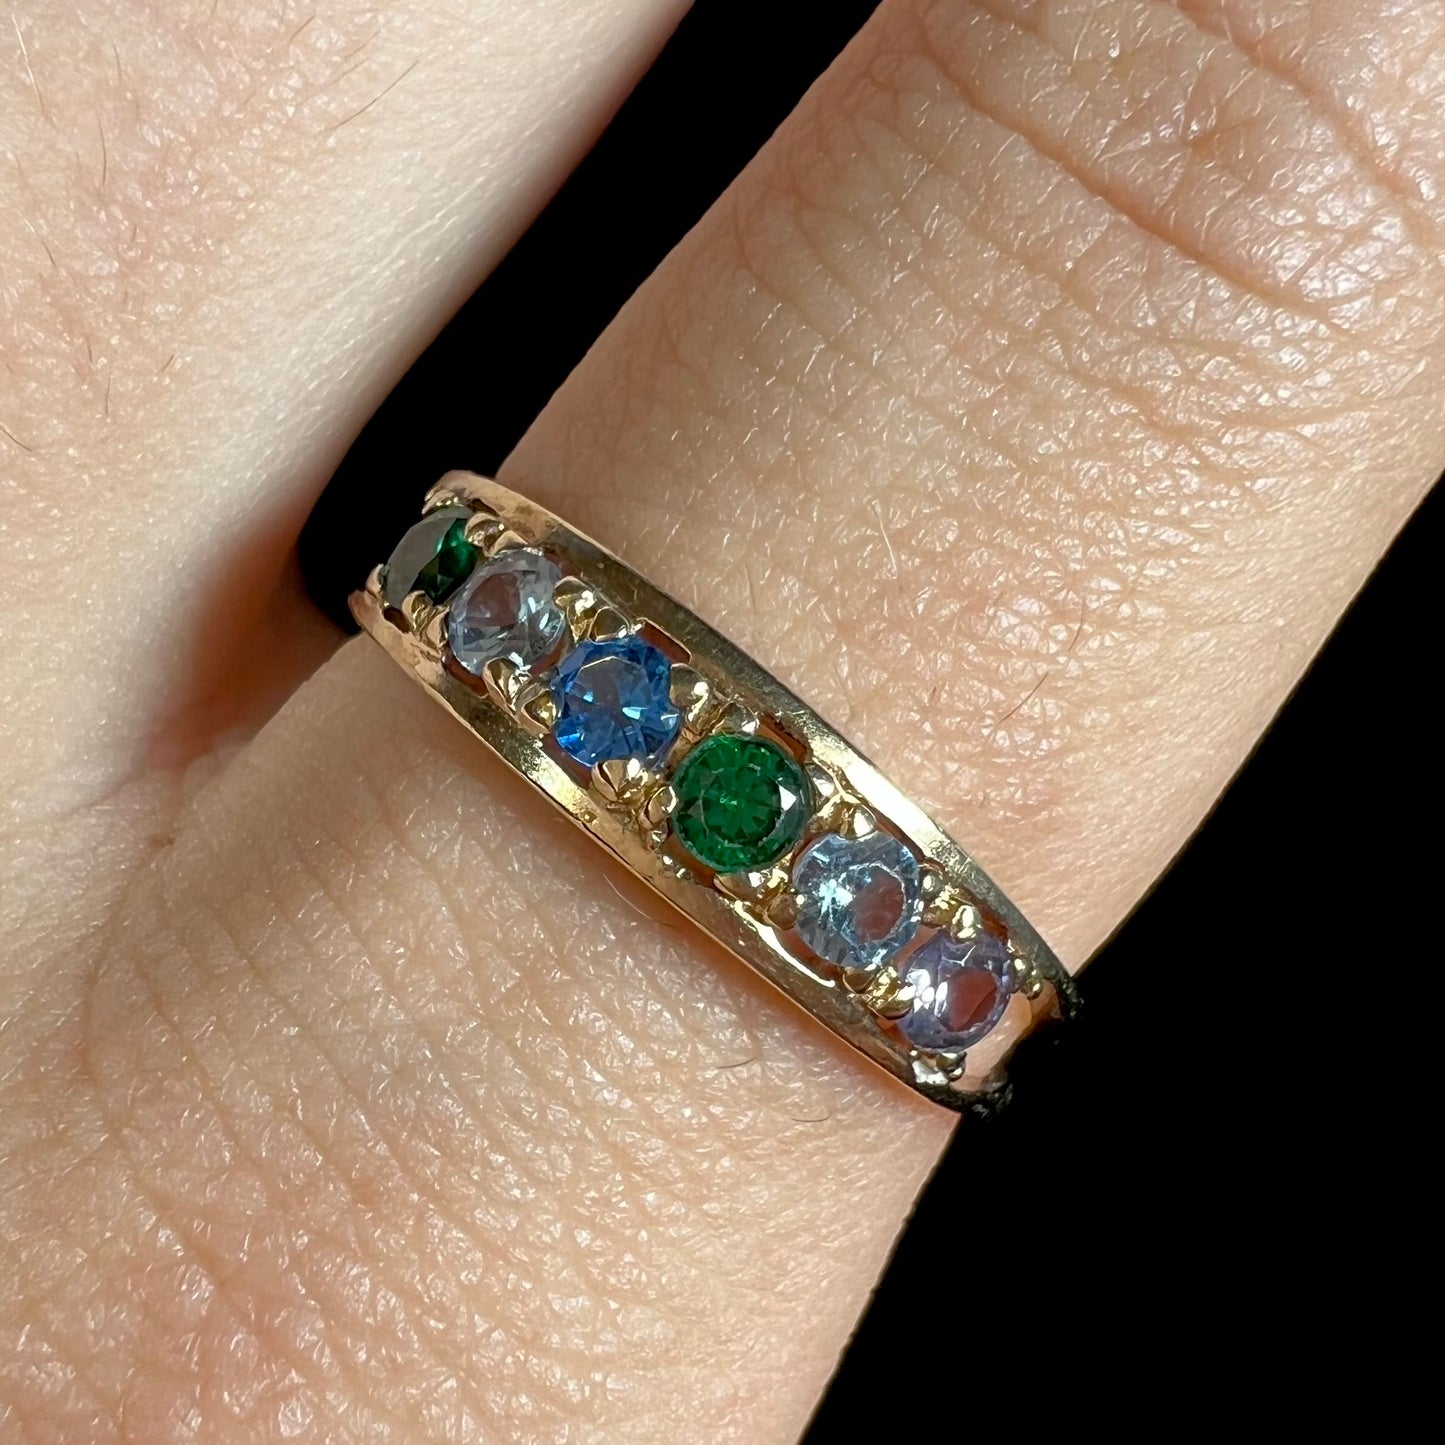 A ladies' yellow gold band set with green, dark blue, light blue, and light purple stones.